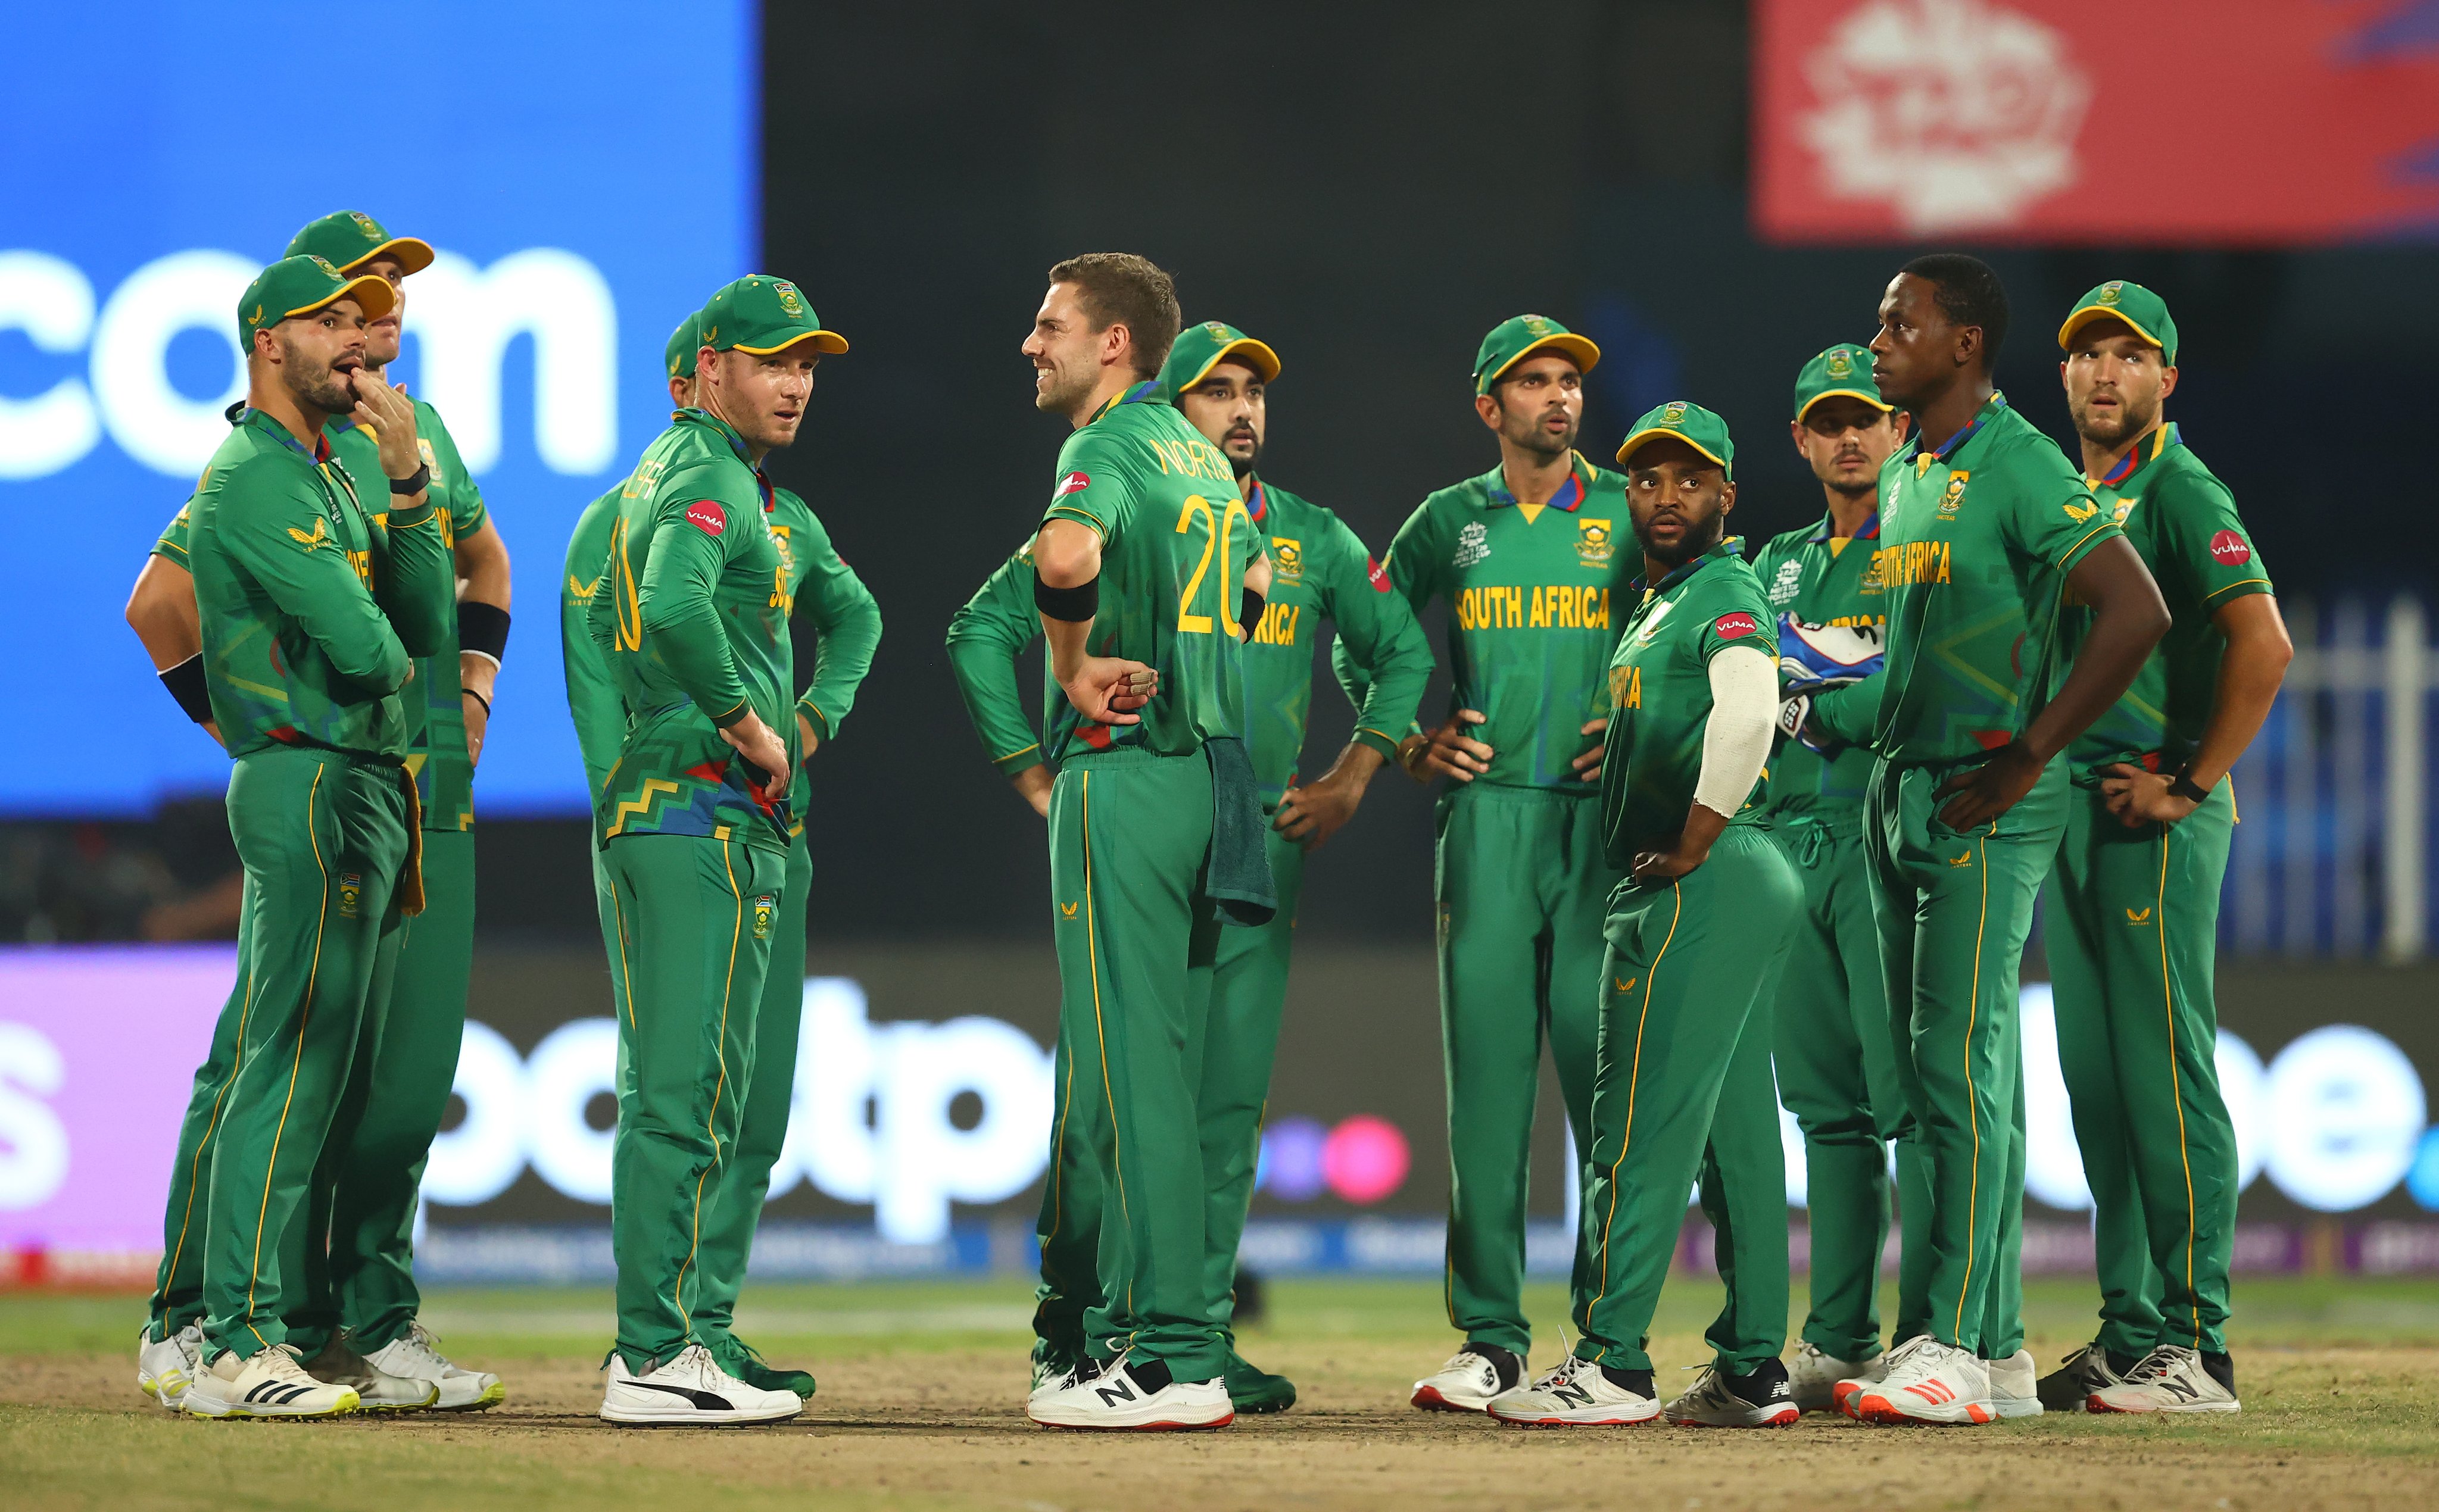 RSA vs NED | South Africa’s international cricket schedule at risk as new Covid-19 variant prompts border closures